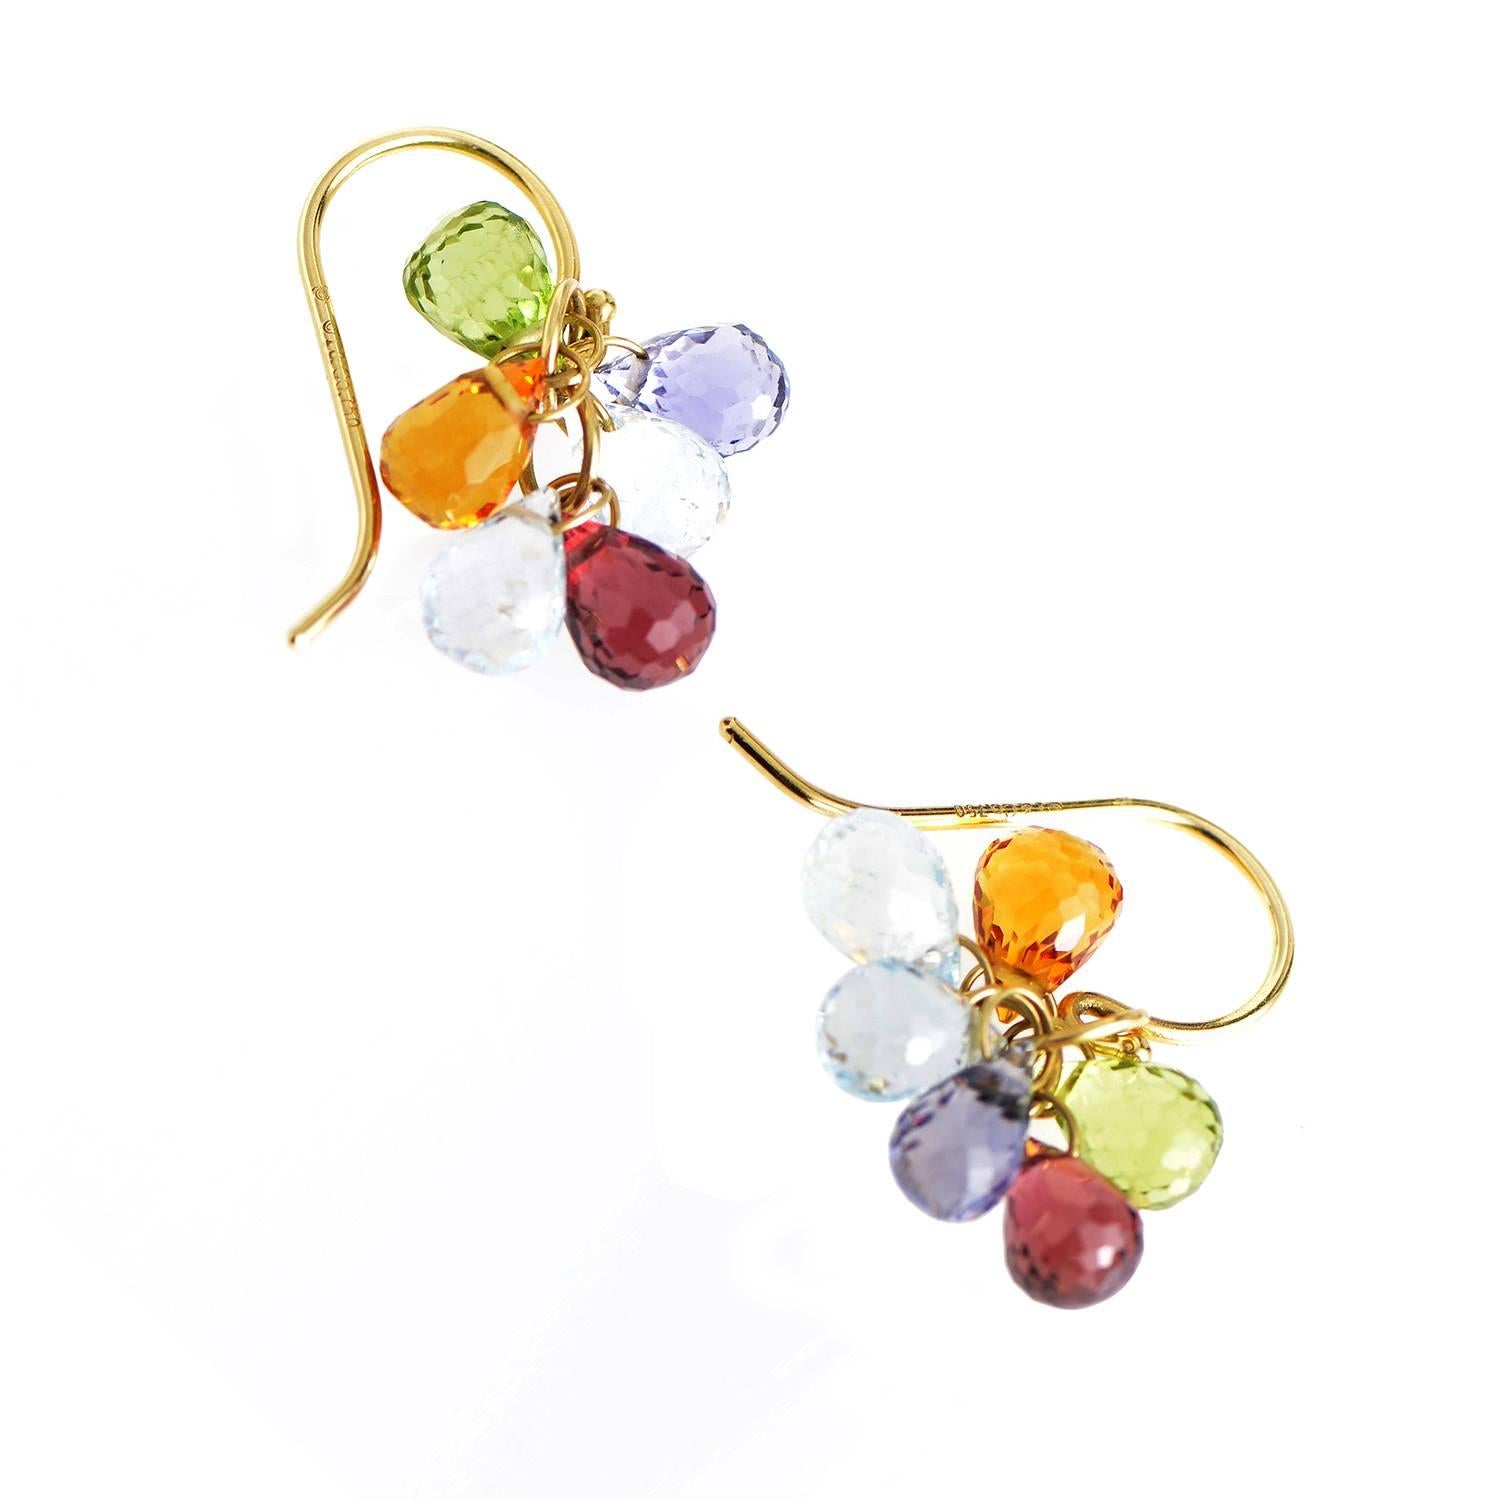 Mesmerizing in its multifaceted and many colors, these multicolored gem Tiffany & Co. earrings are a playful example of refined style and shows that simplicity doesn't have to be monochromatic. The 18K yellow gold French wire gives a simple yet